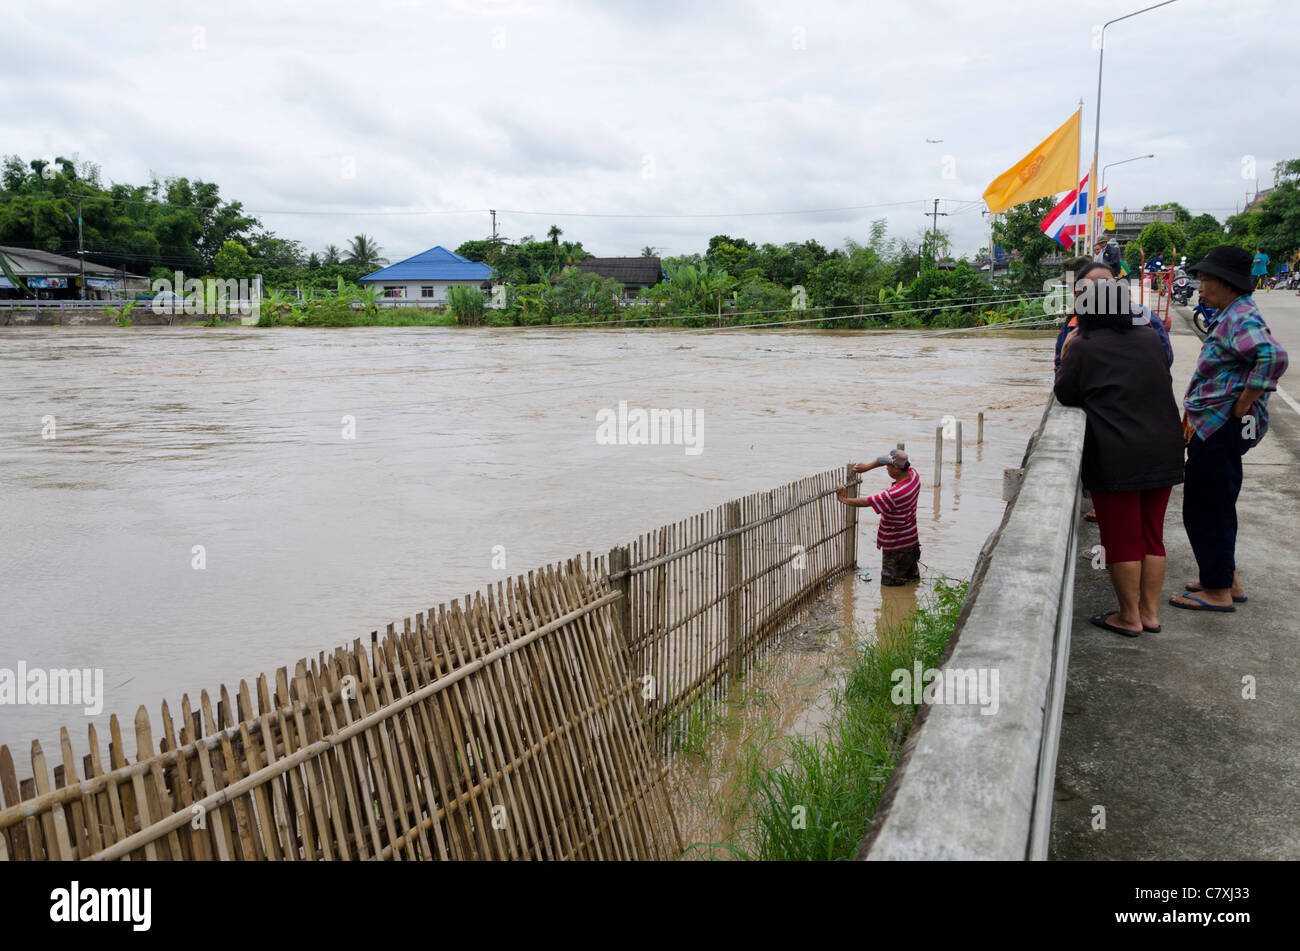 Man removes fencing in yard next to bridge flooded by rising Ping River south of Chiang Mai Thailand while spectators watch Stock Photo